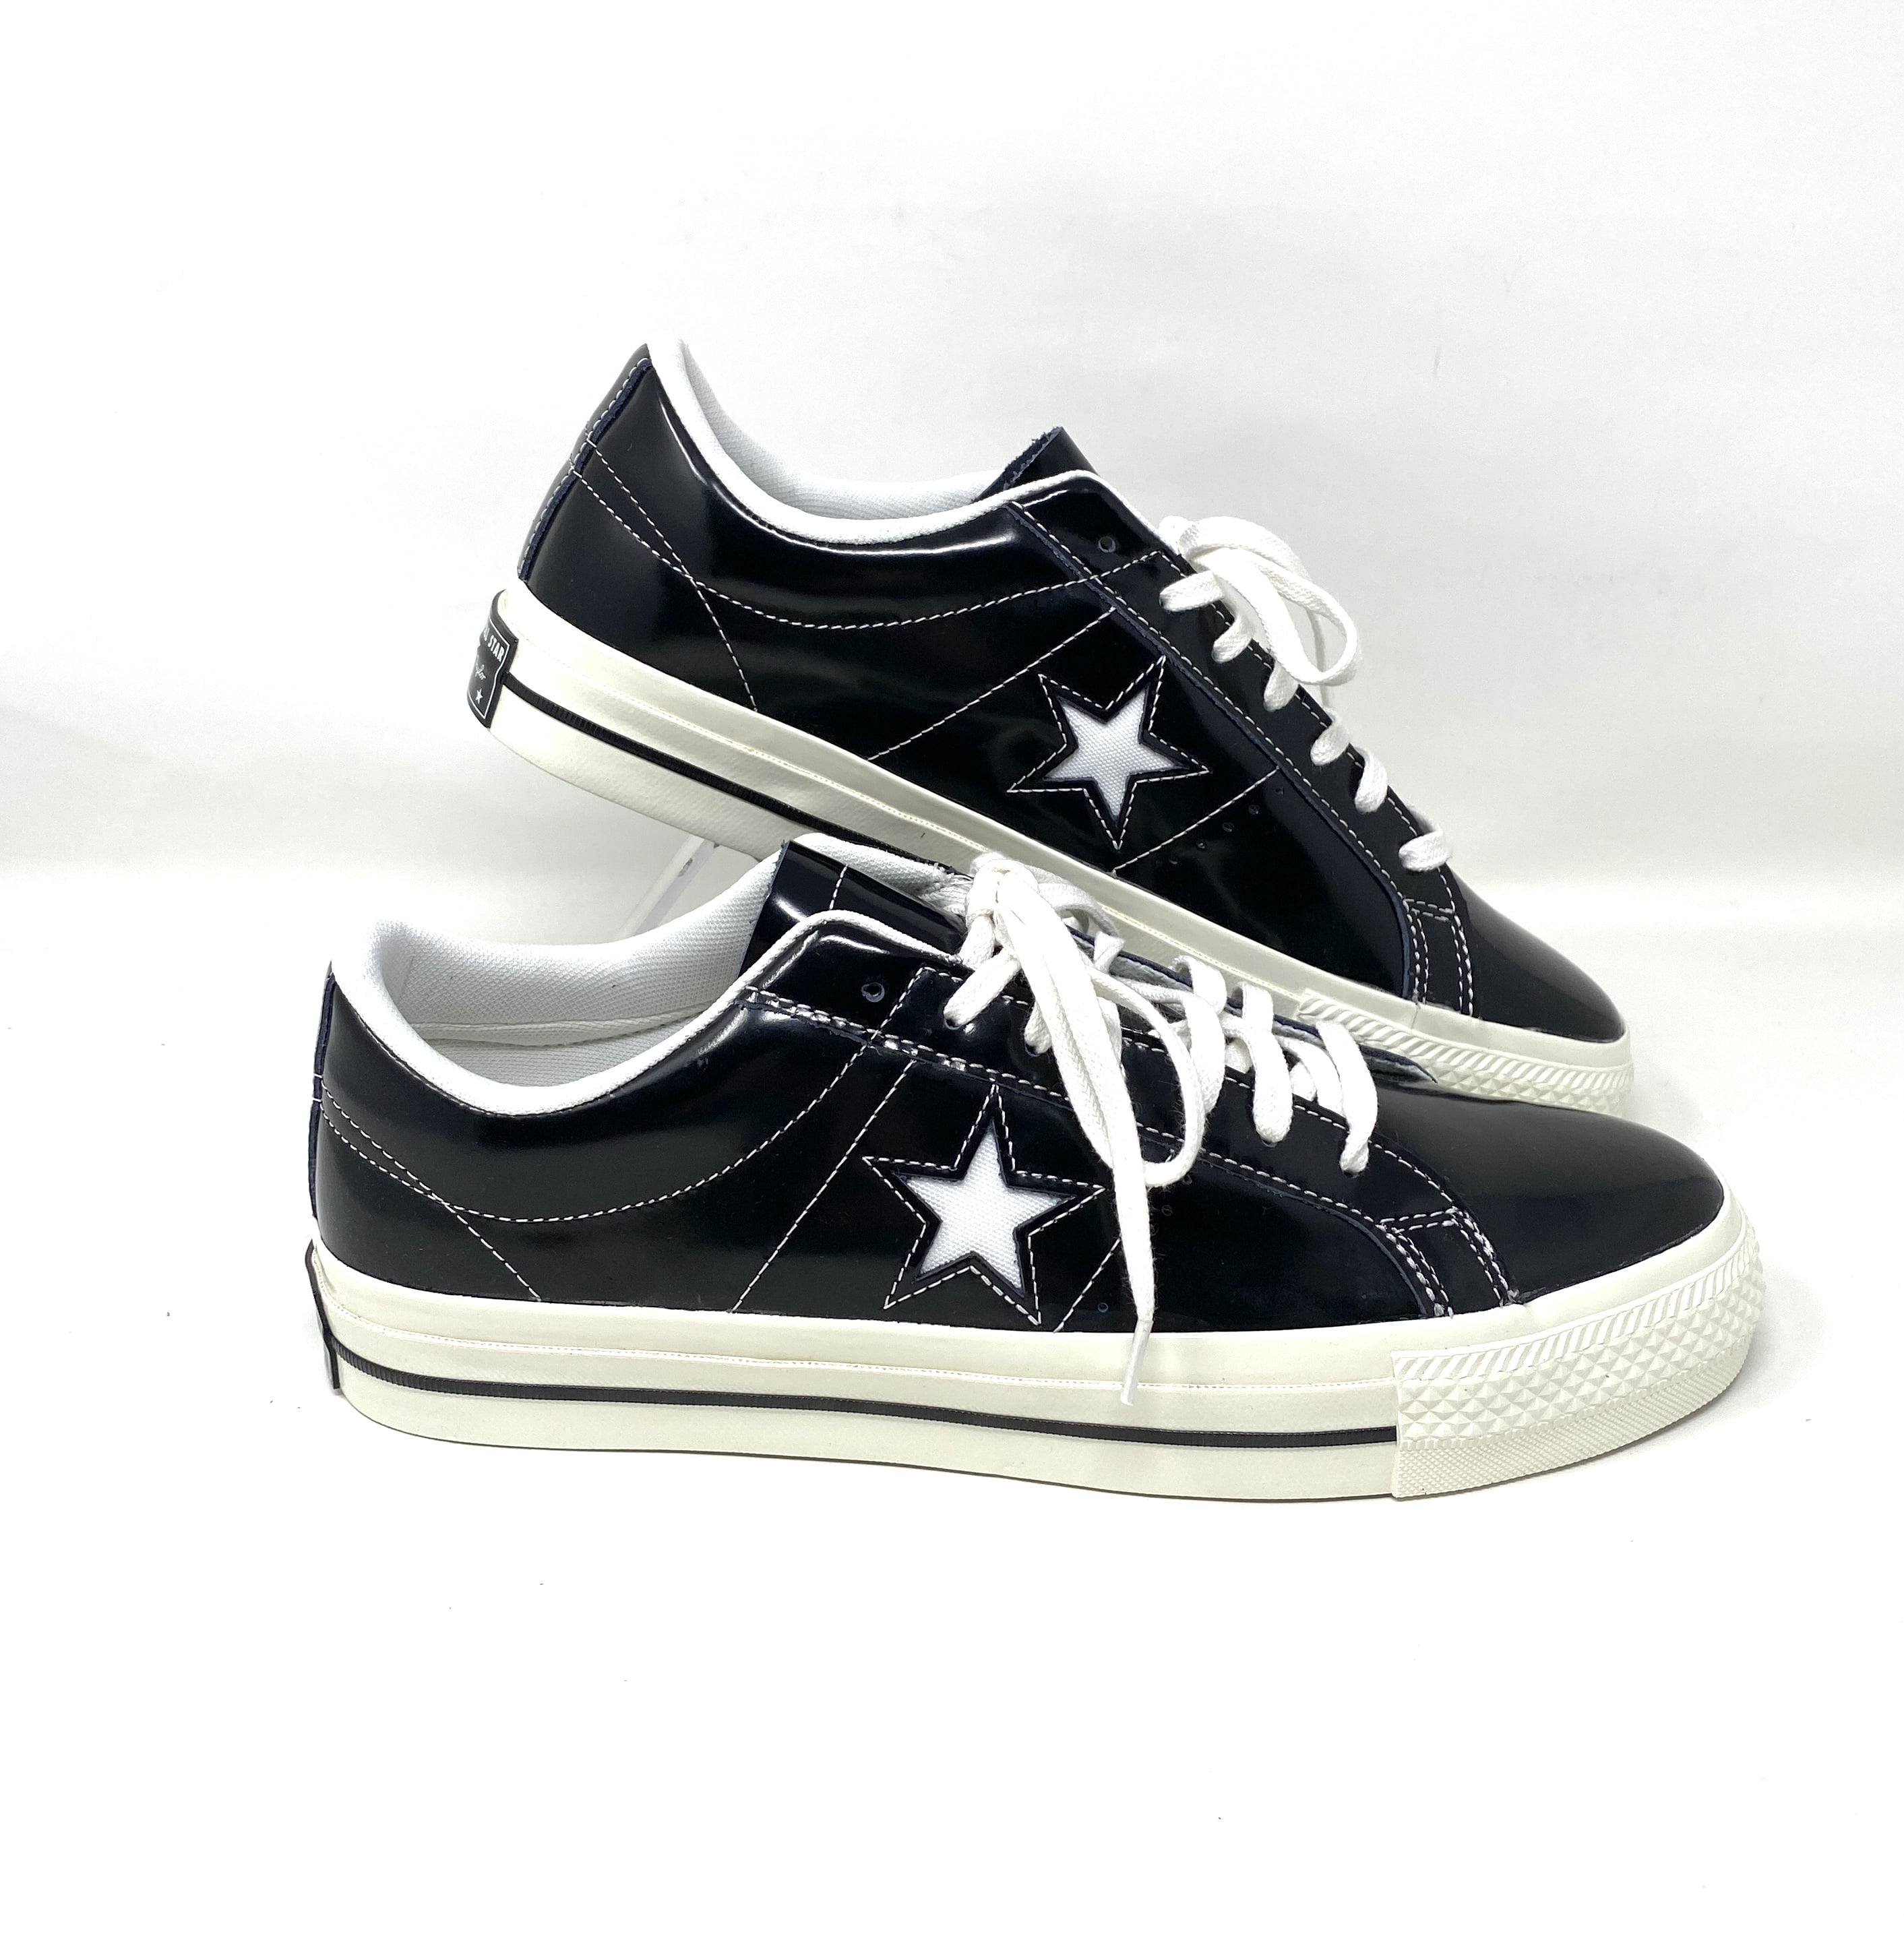 Converse Men's One Star OX Low Top Patent Leather Black Sneakers 171588C -  